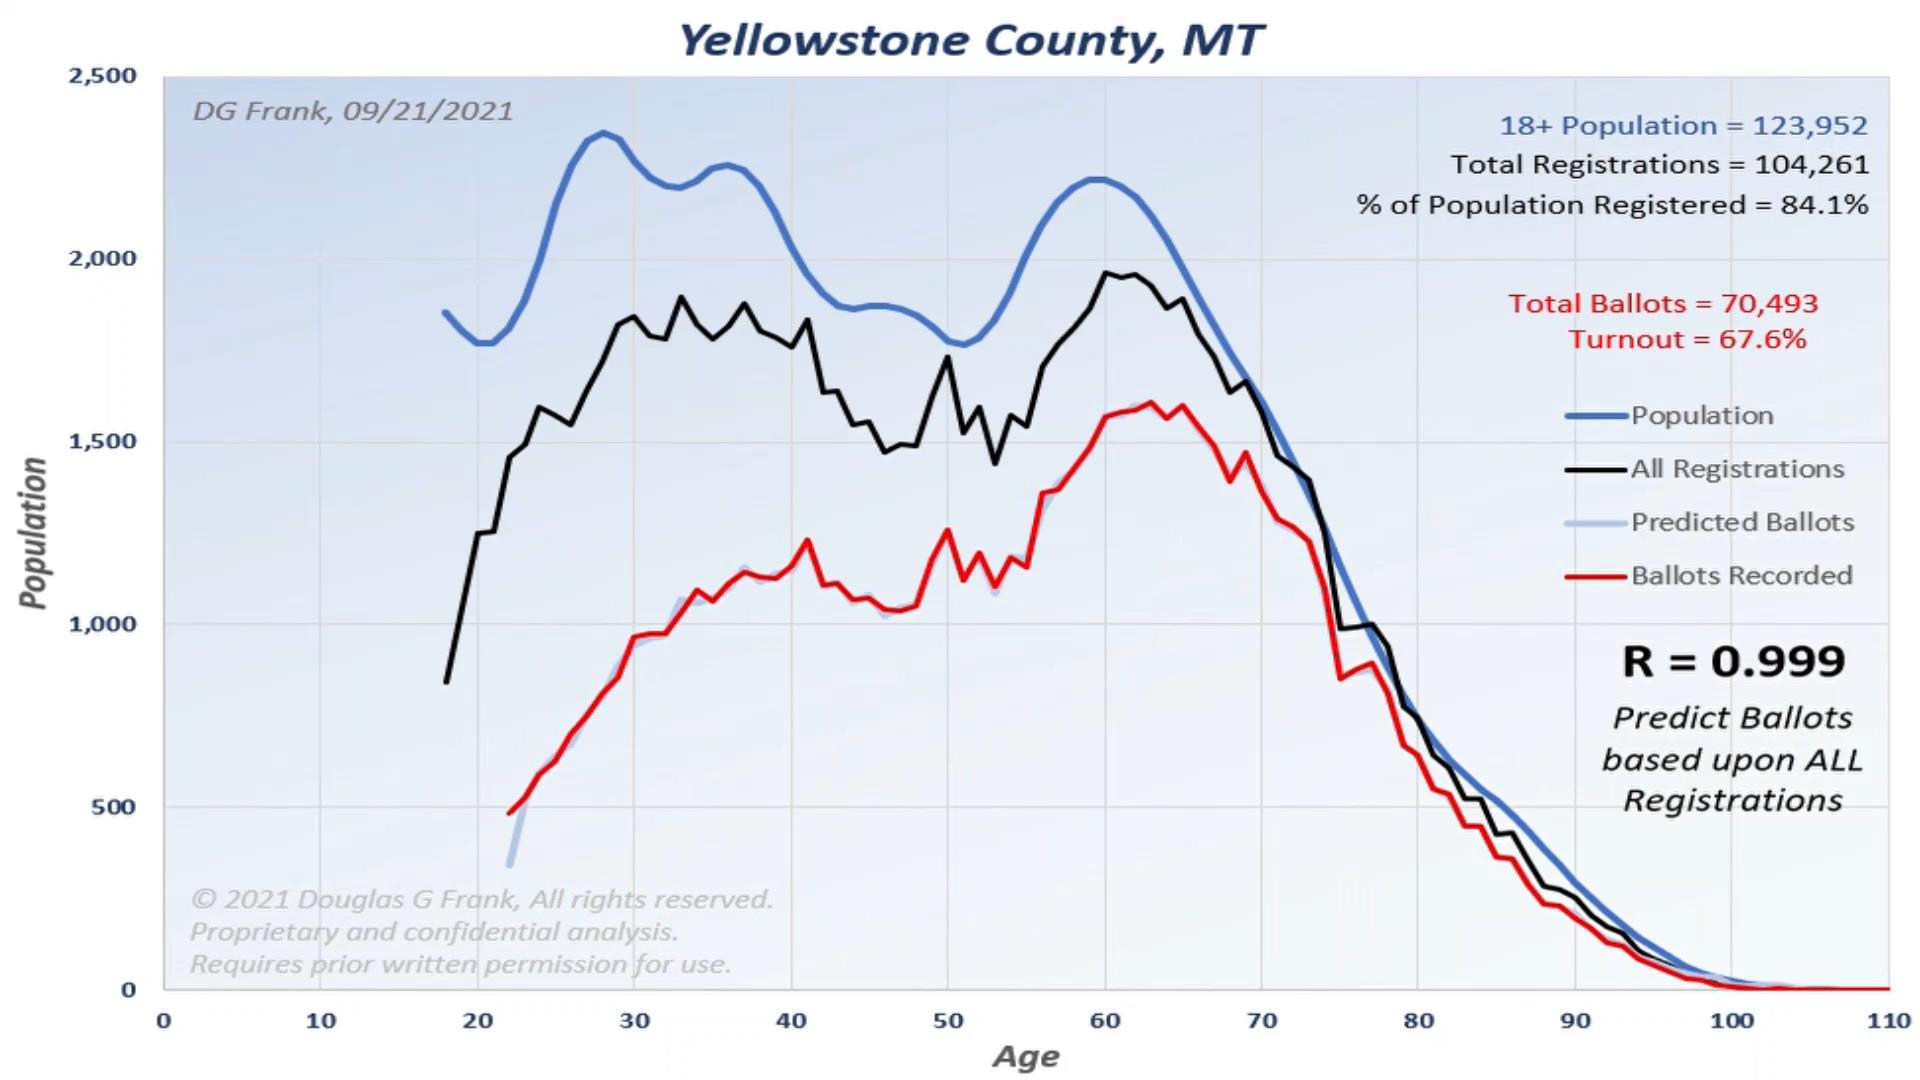 Yellowstone County 2020 Election Analysis Chart by Dr. Doug Frank